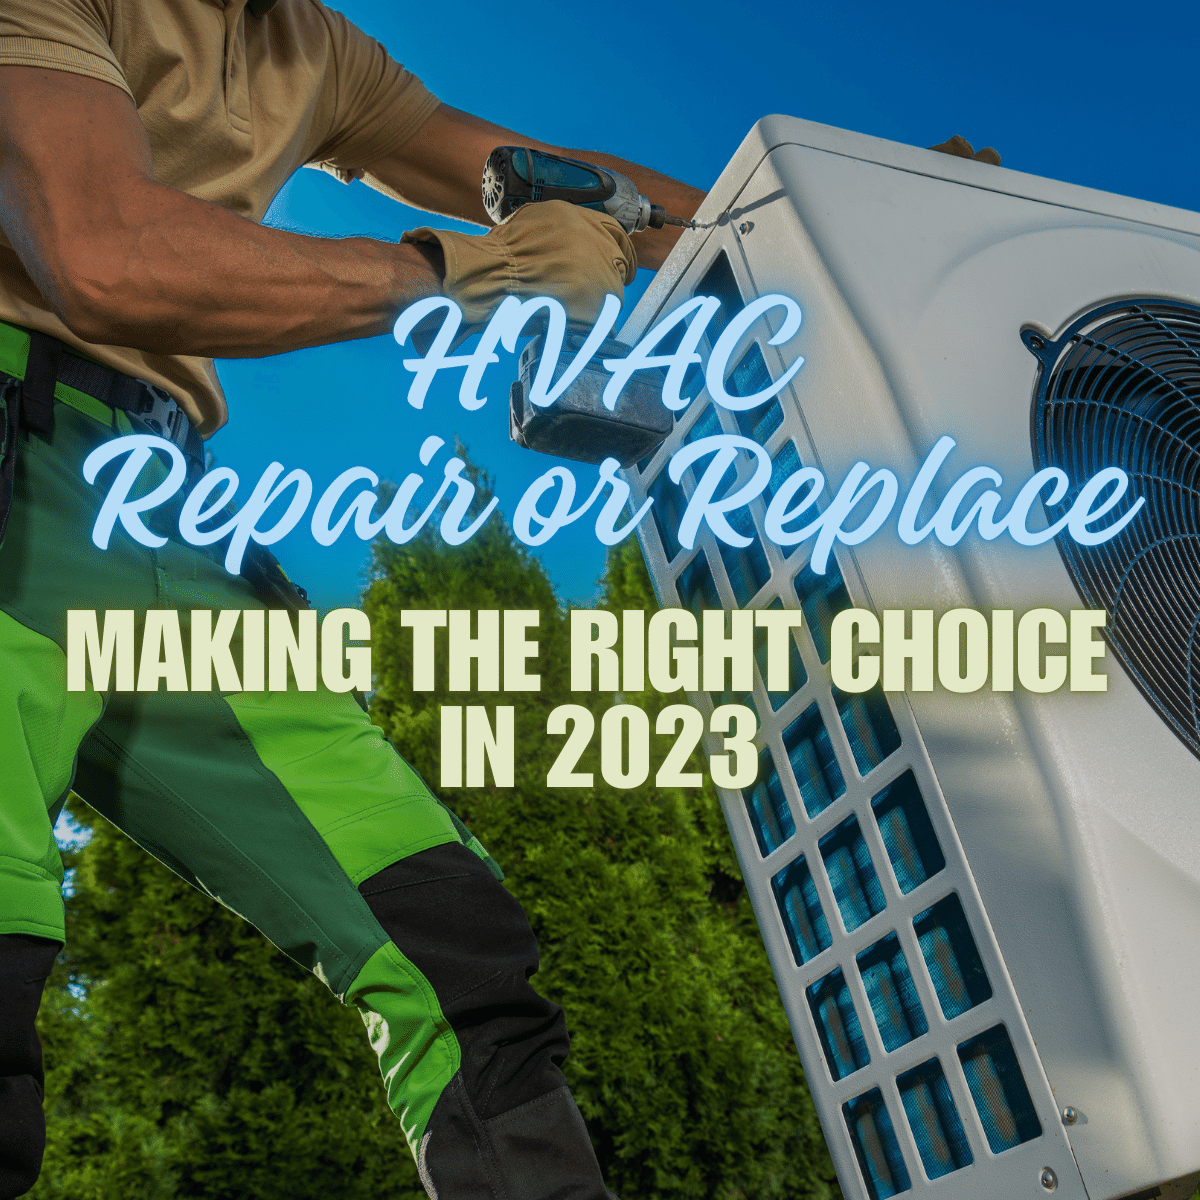 HVAC Repair or Replace: Making the Right Choice in 2023